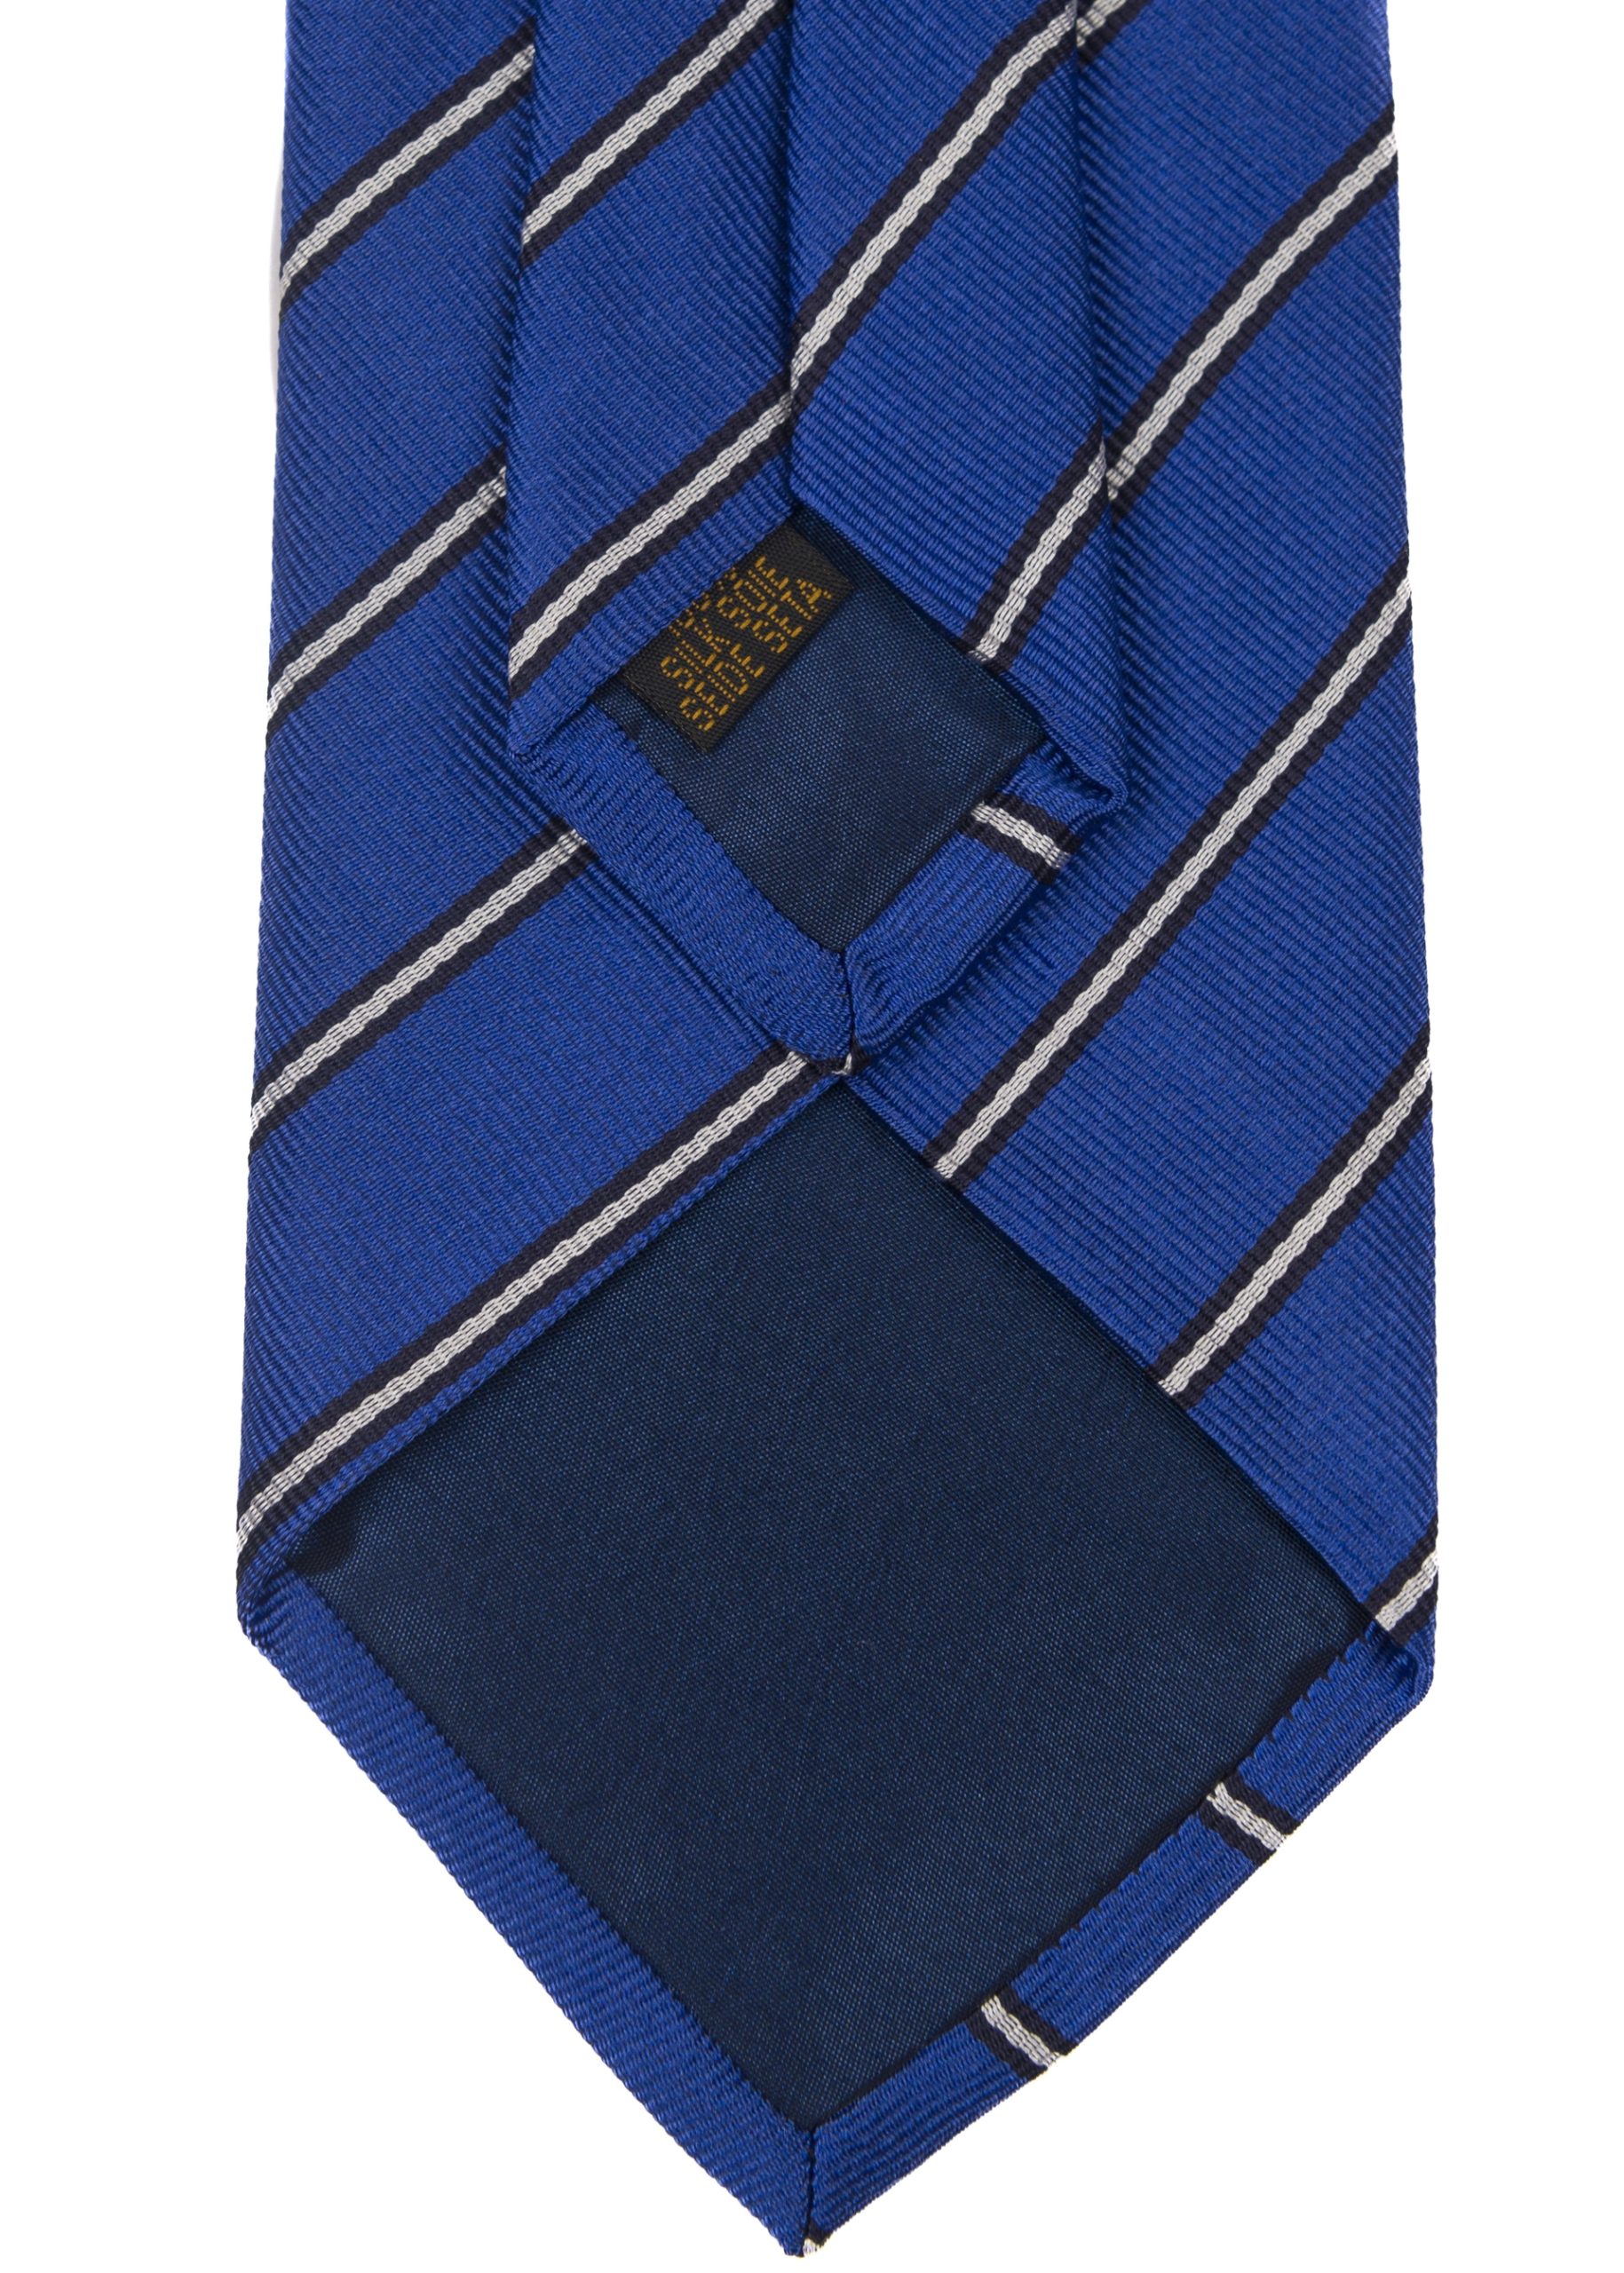 Roderick Charles navy and blue striped tie